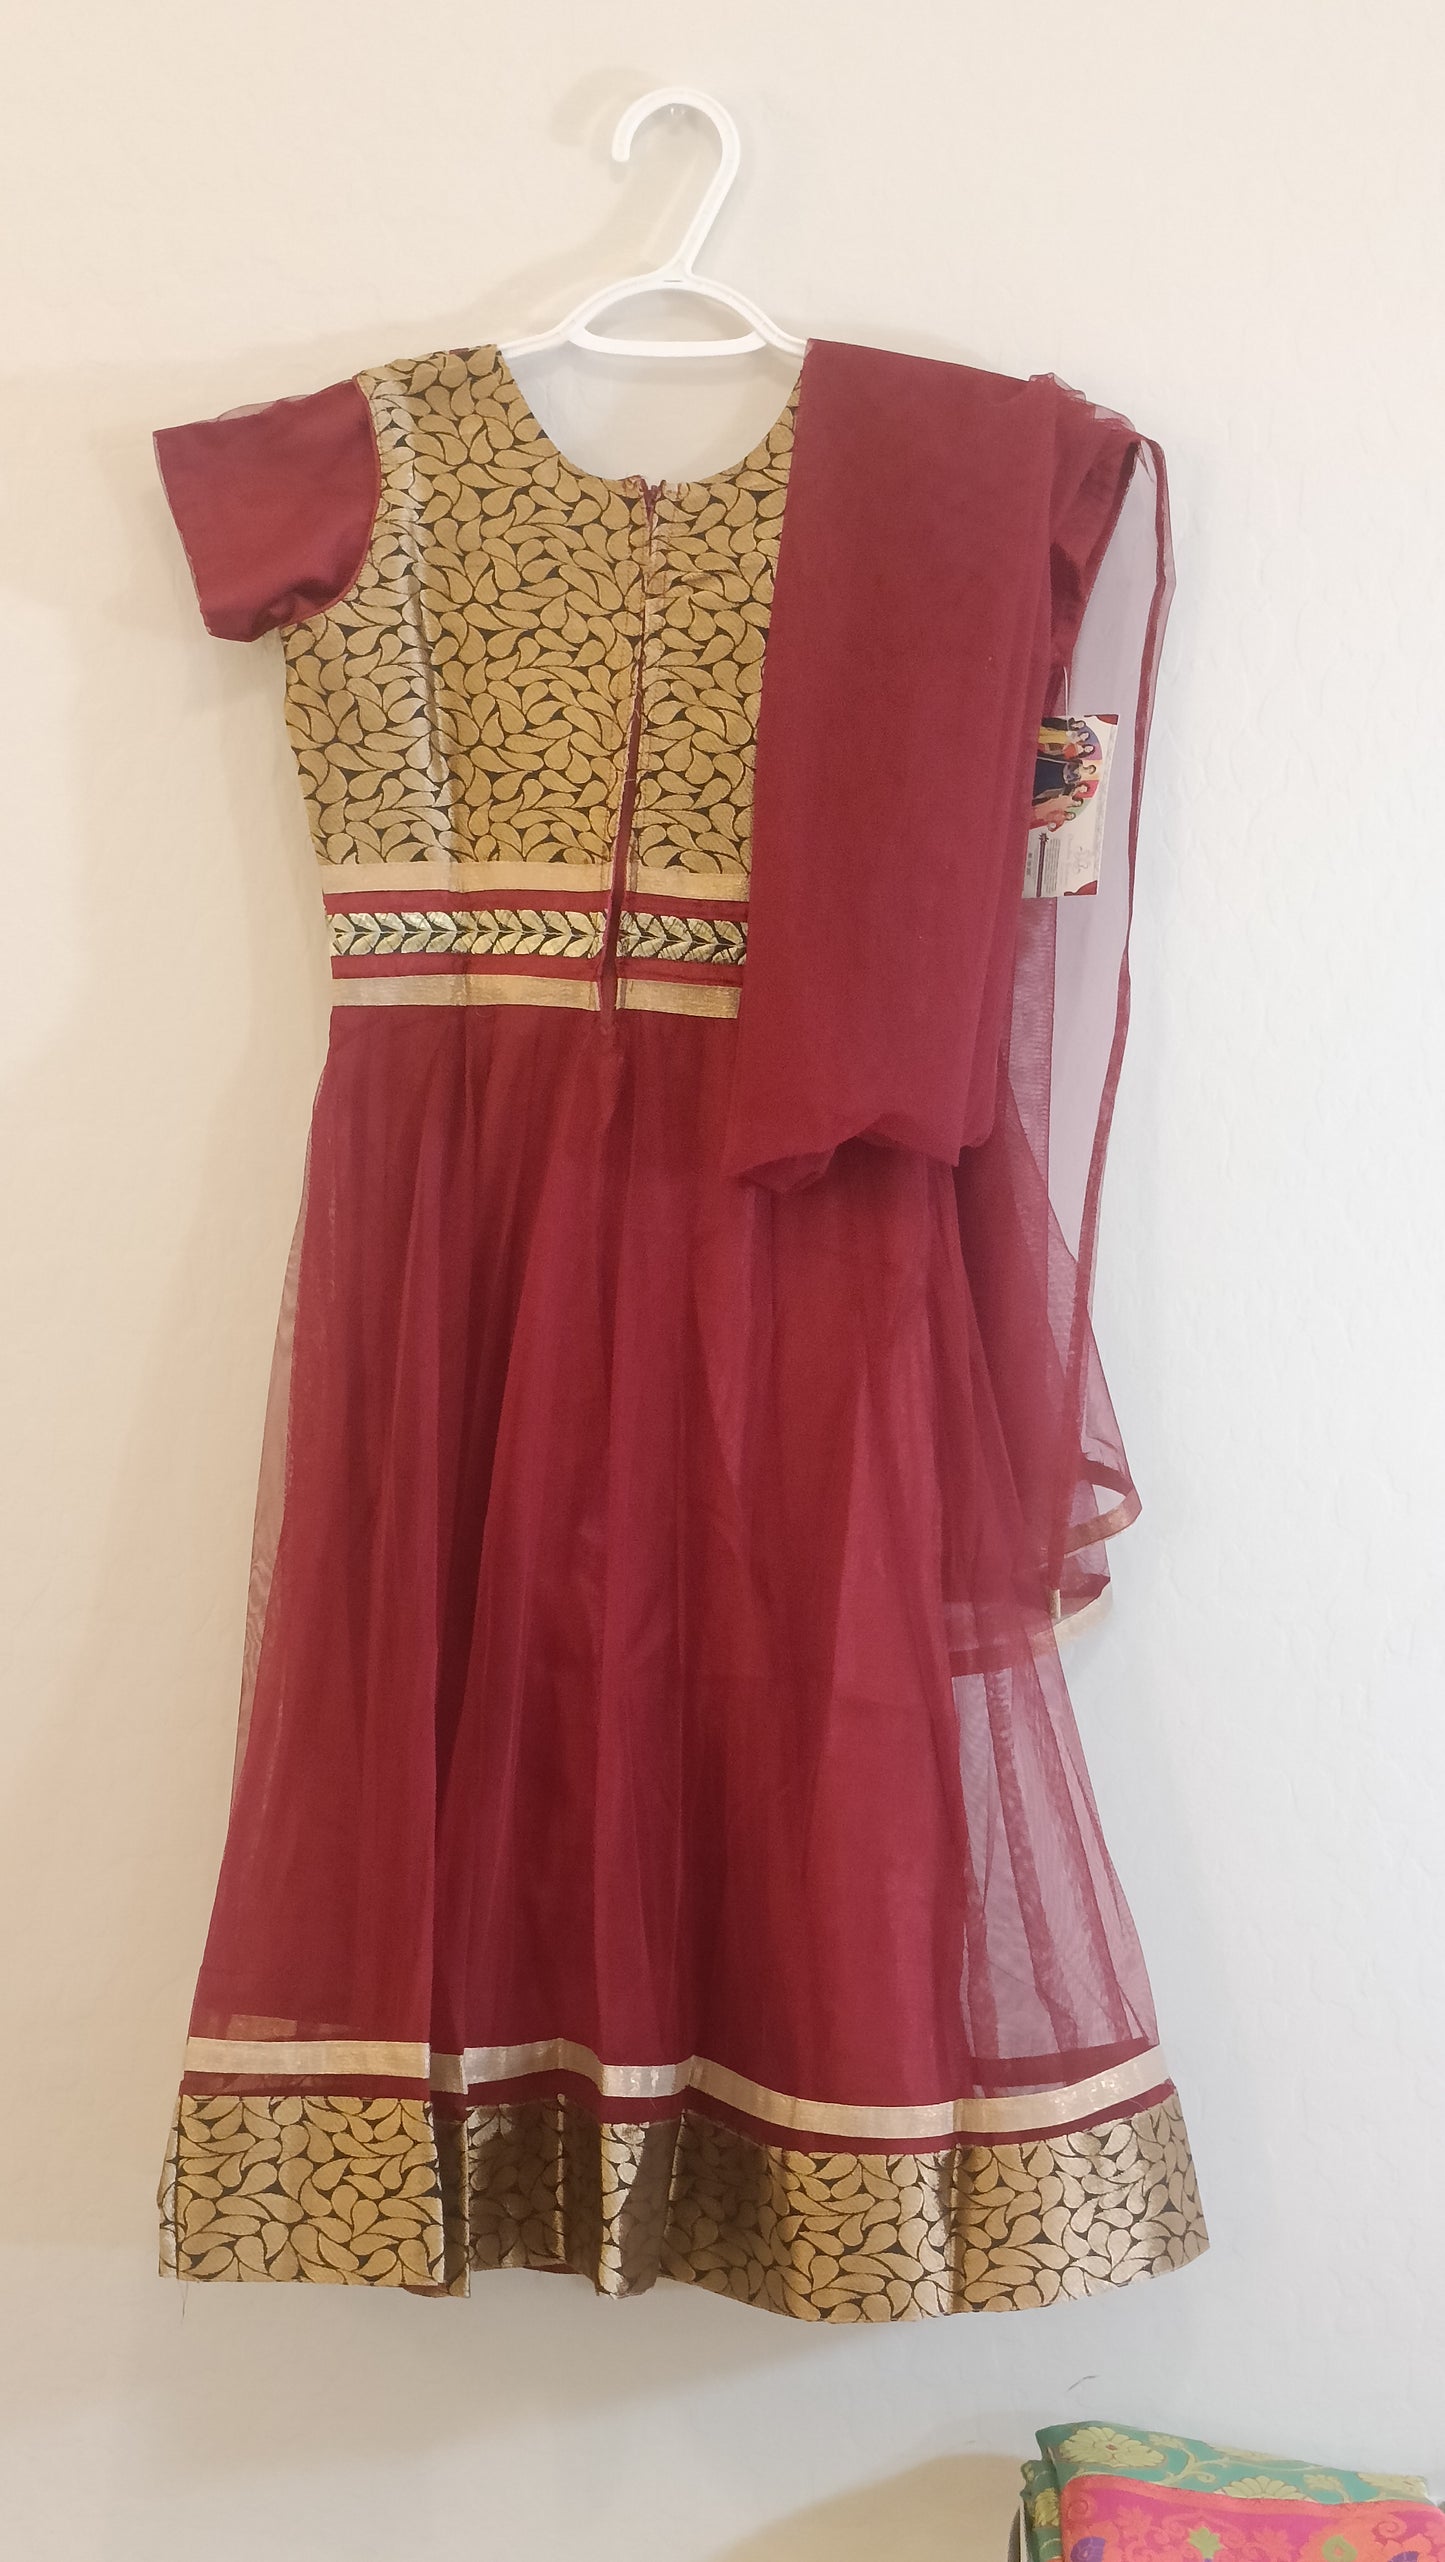 Pleasing Maroon Color Kurti With Embroidery Work In Gilbert